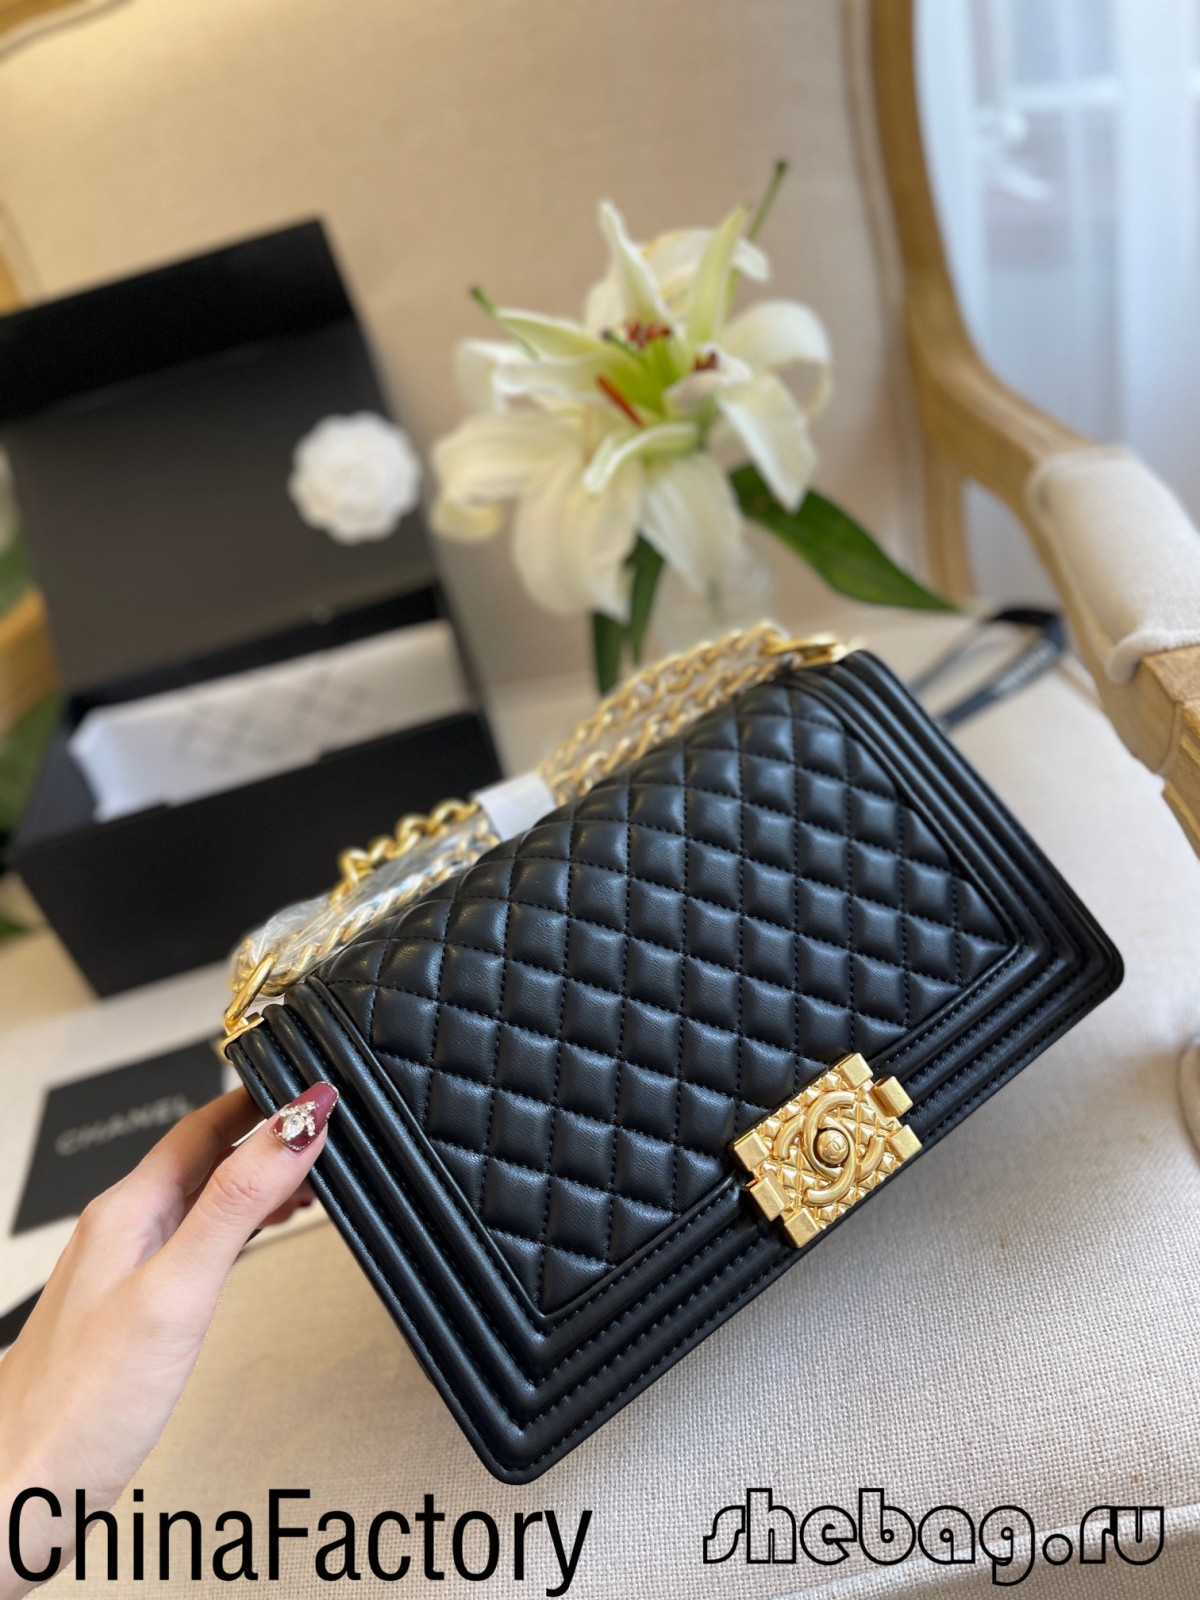 Best Quality 2.55 Chanel sacculi replica fontes in Sinis (updated in 2022)-Best Quality Fake Louis Vuitton Bag Online Store, Replica designer bag ru